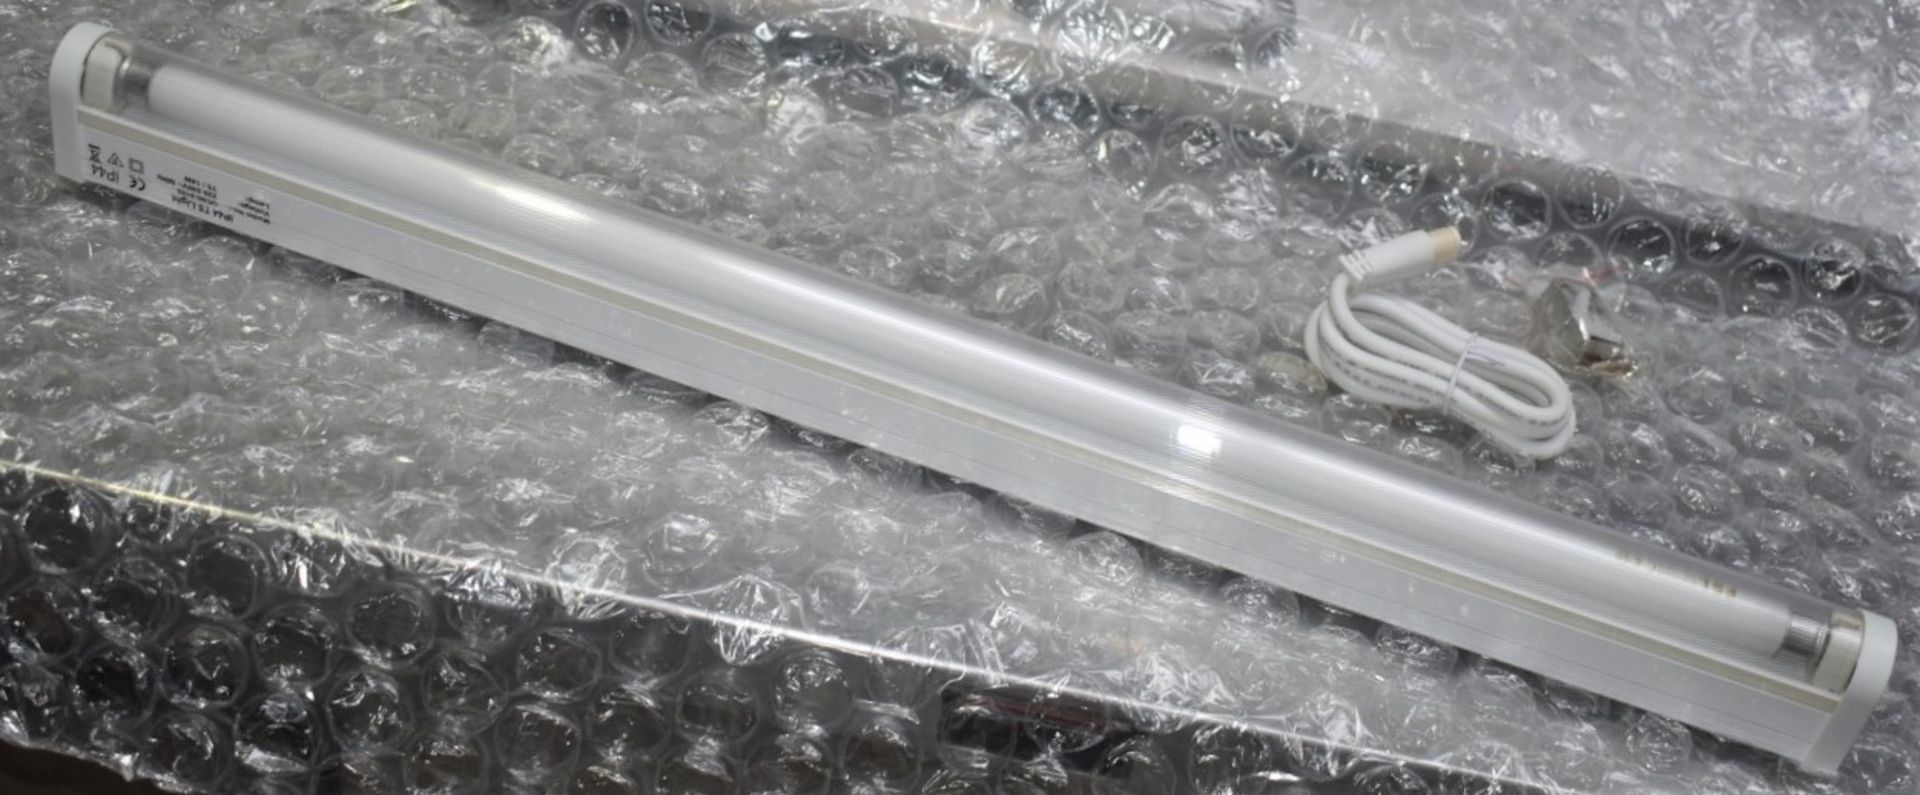 1 x Bathroom Light Fitting - IP44 Waterproof T5 14w Fluorescent Lights With Built-In Electronic - Image 5 of 11